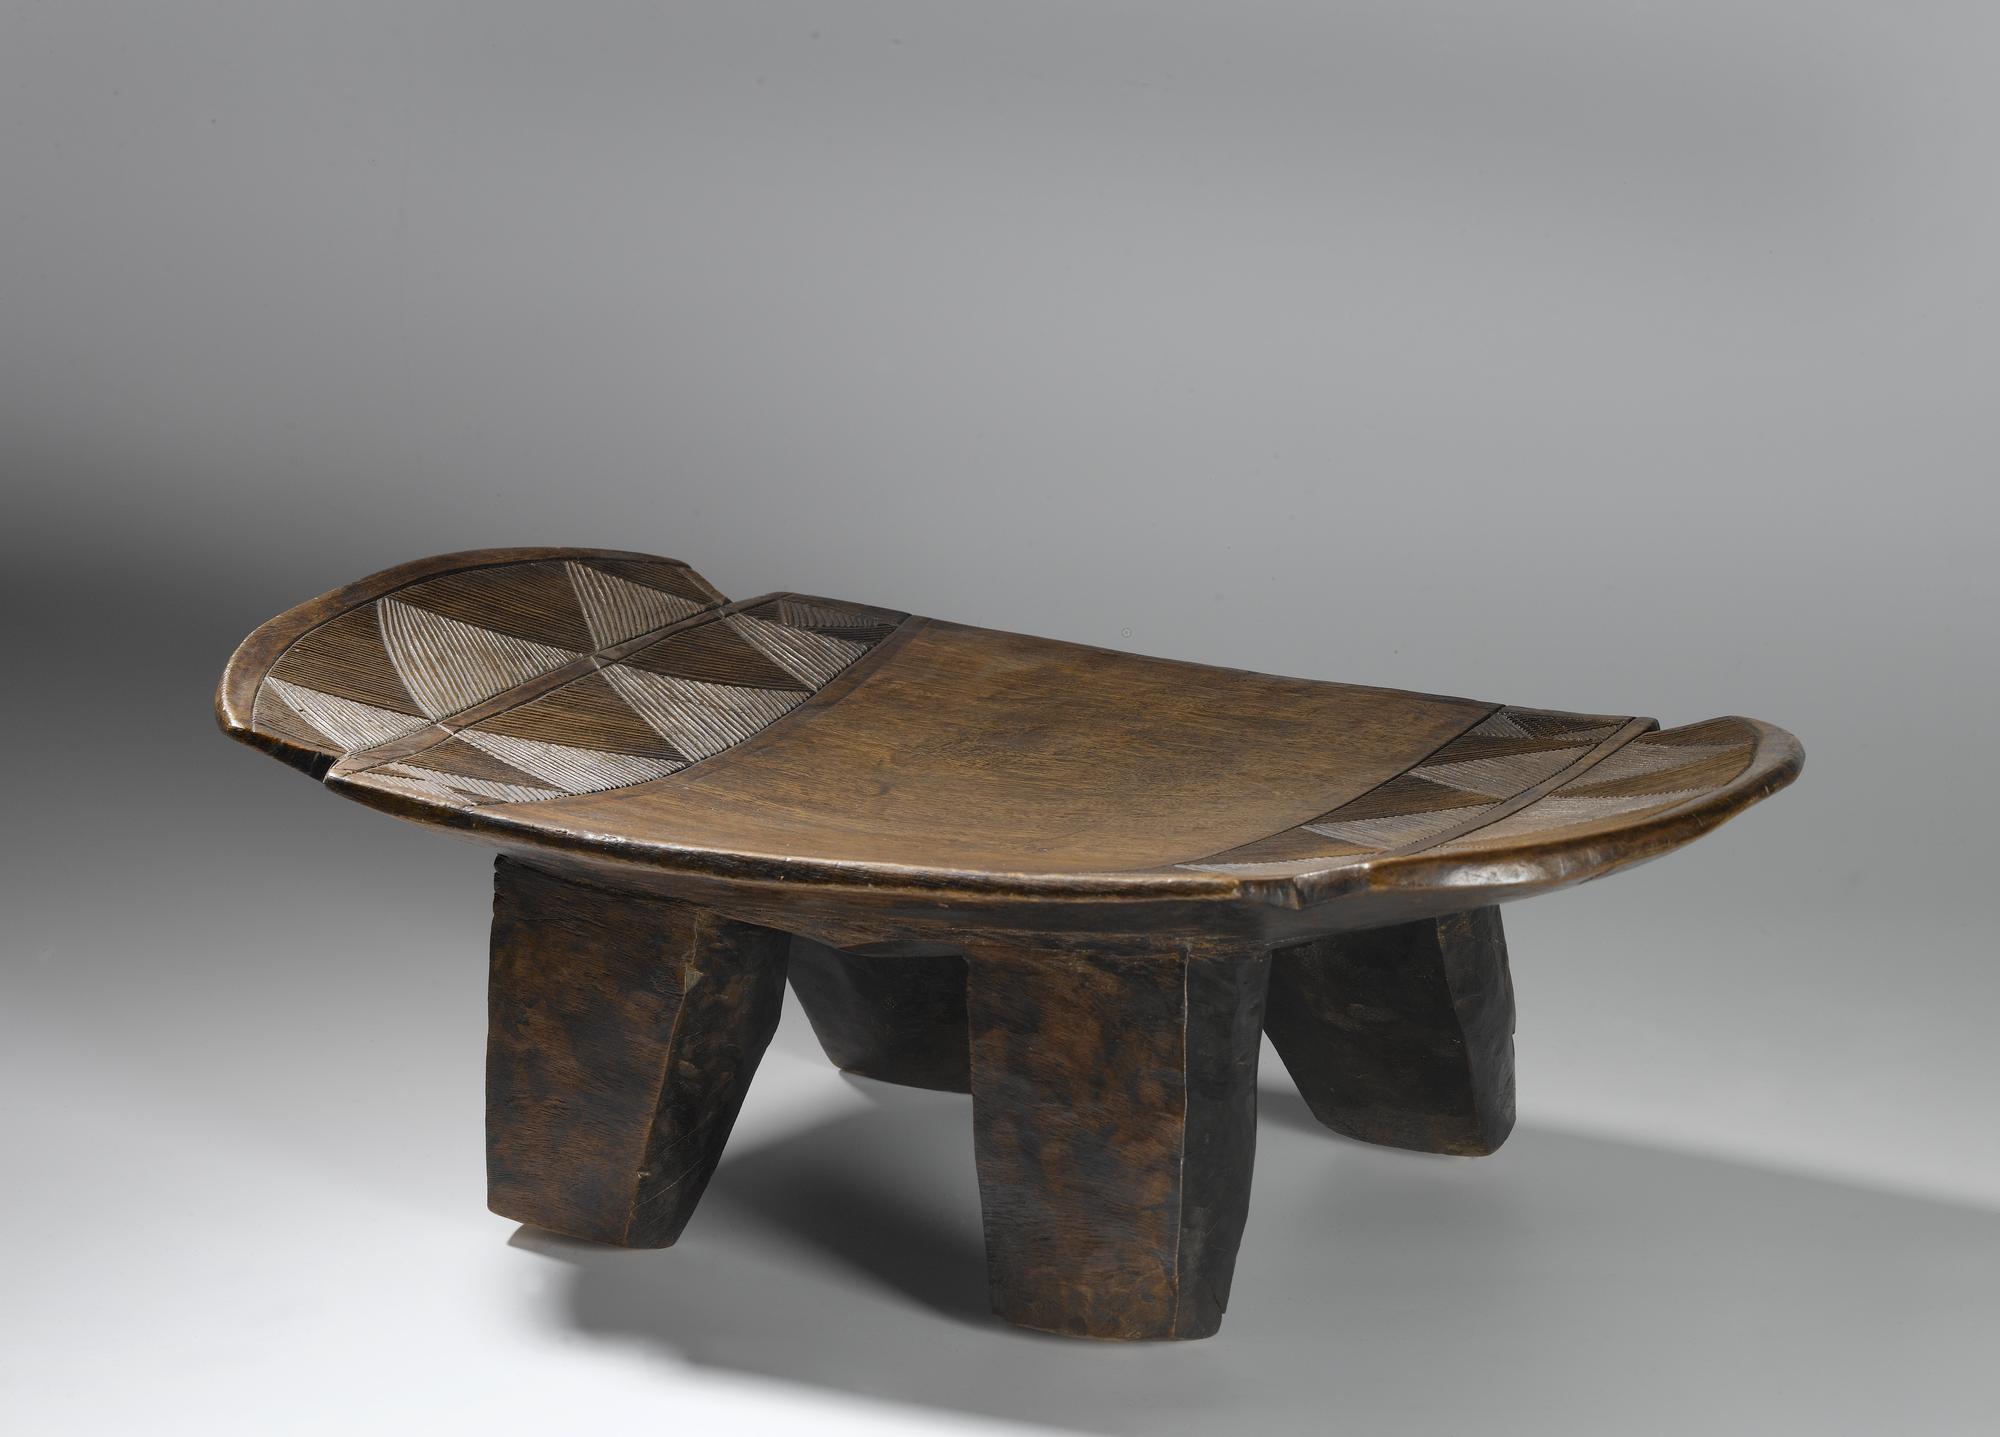 Slightly curved oblong wooden stool on four legs, with carved linear ornament: Africa, Southern Africa, Zambia, Tanganyika Plateau, Awemba, late 19th century.